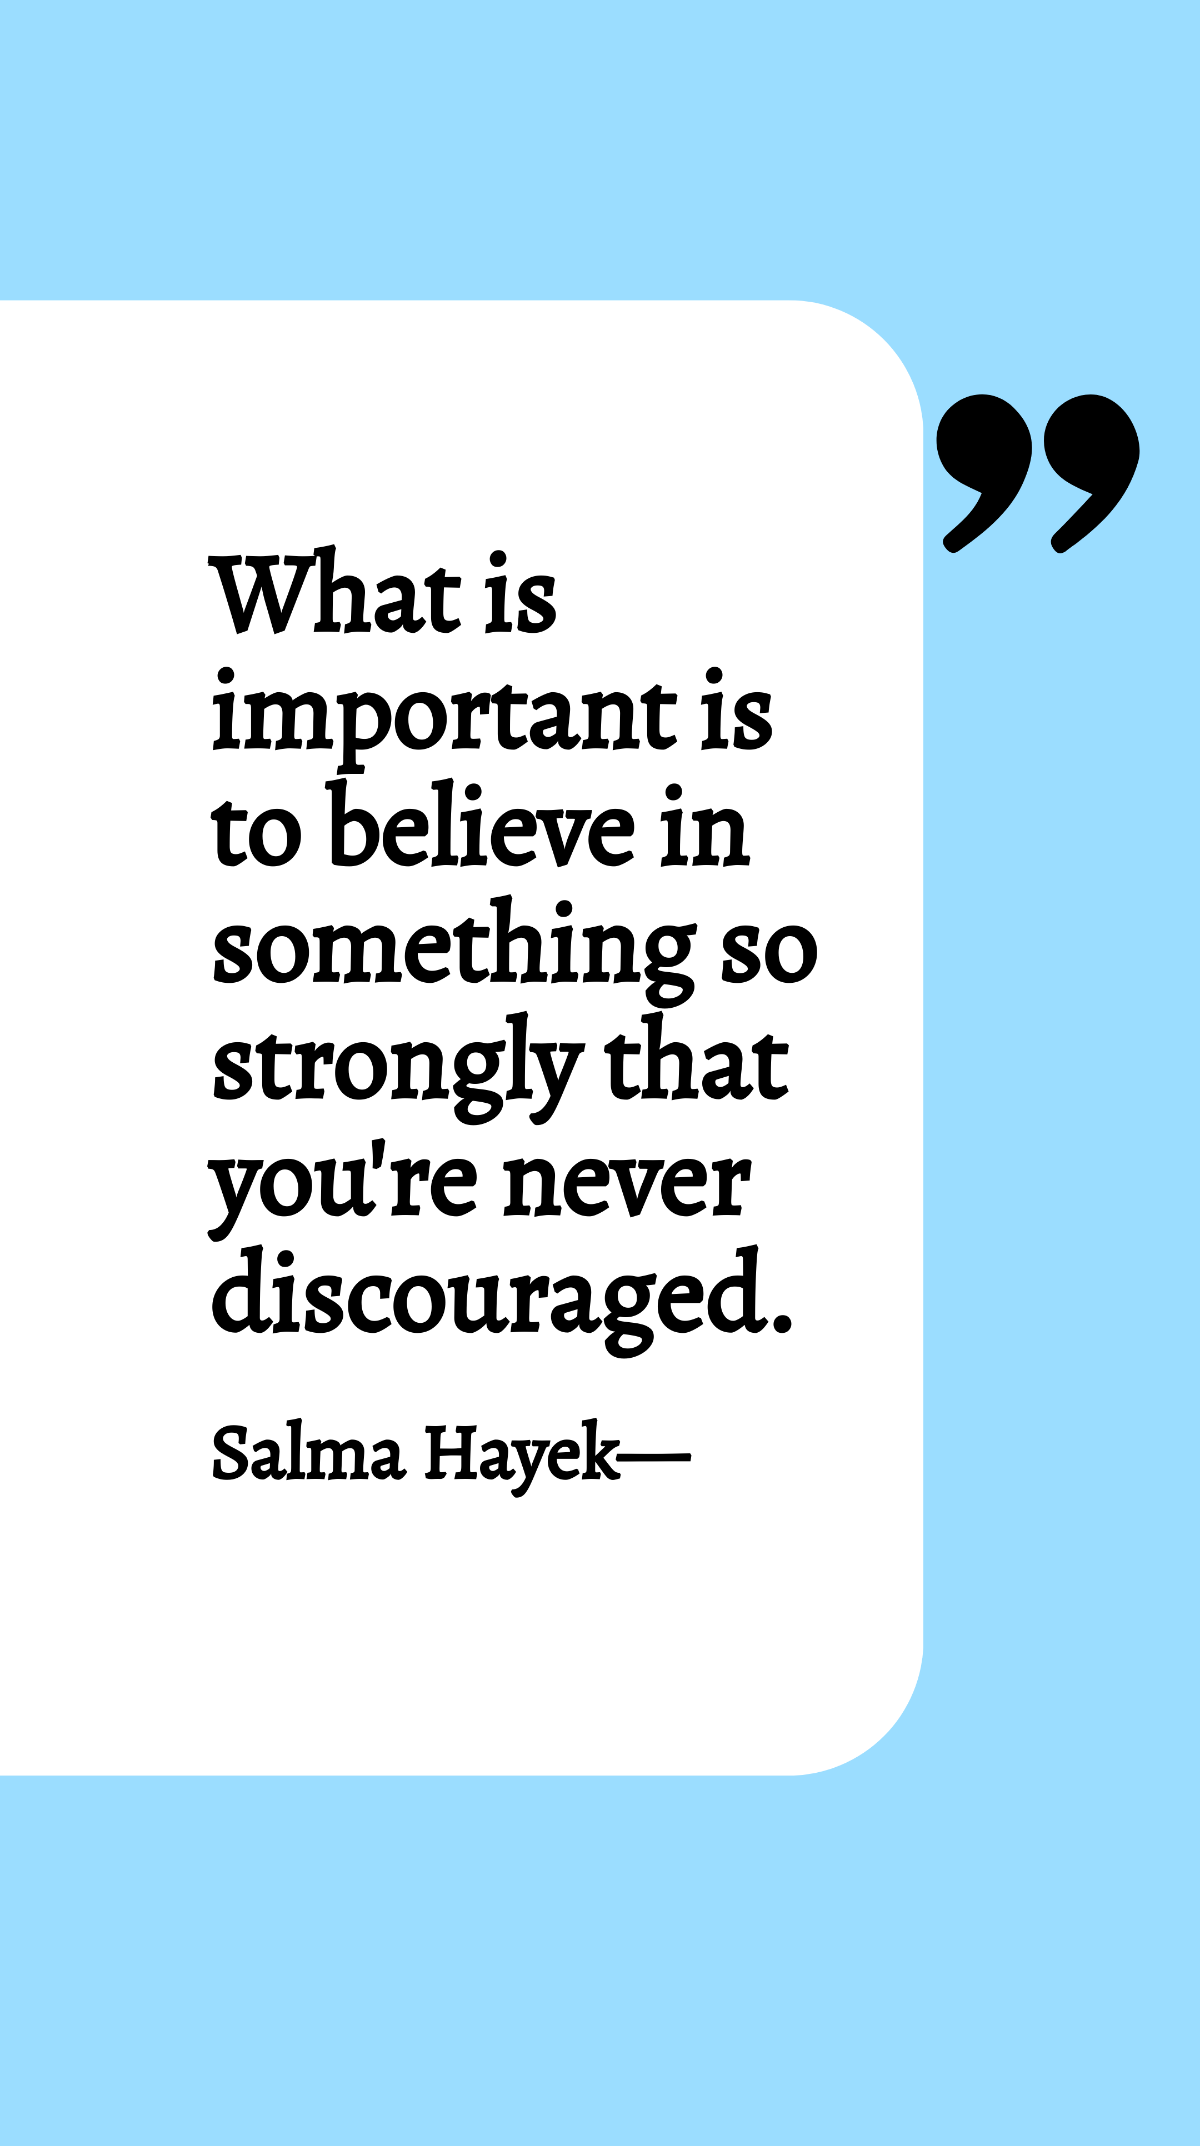 Salma Hayek - What is important is to believe in something so strongly that you're never discouraged. Template